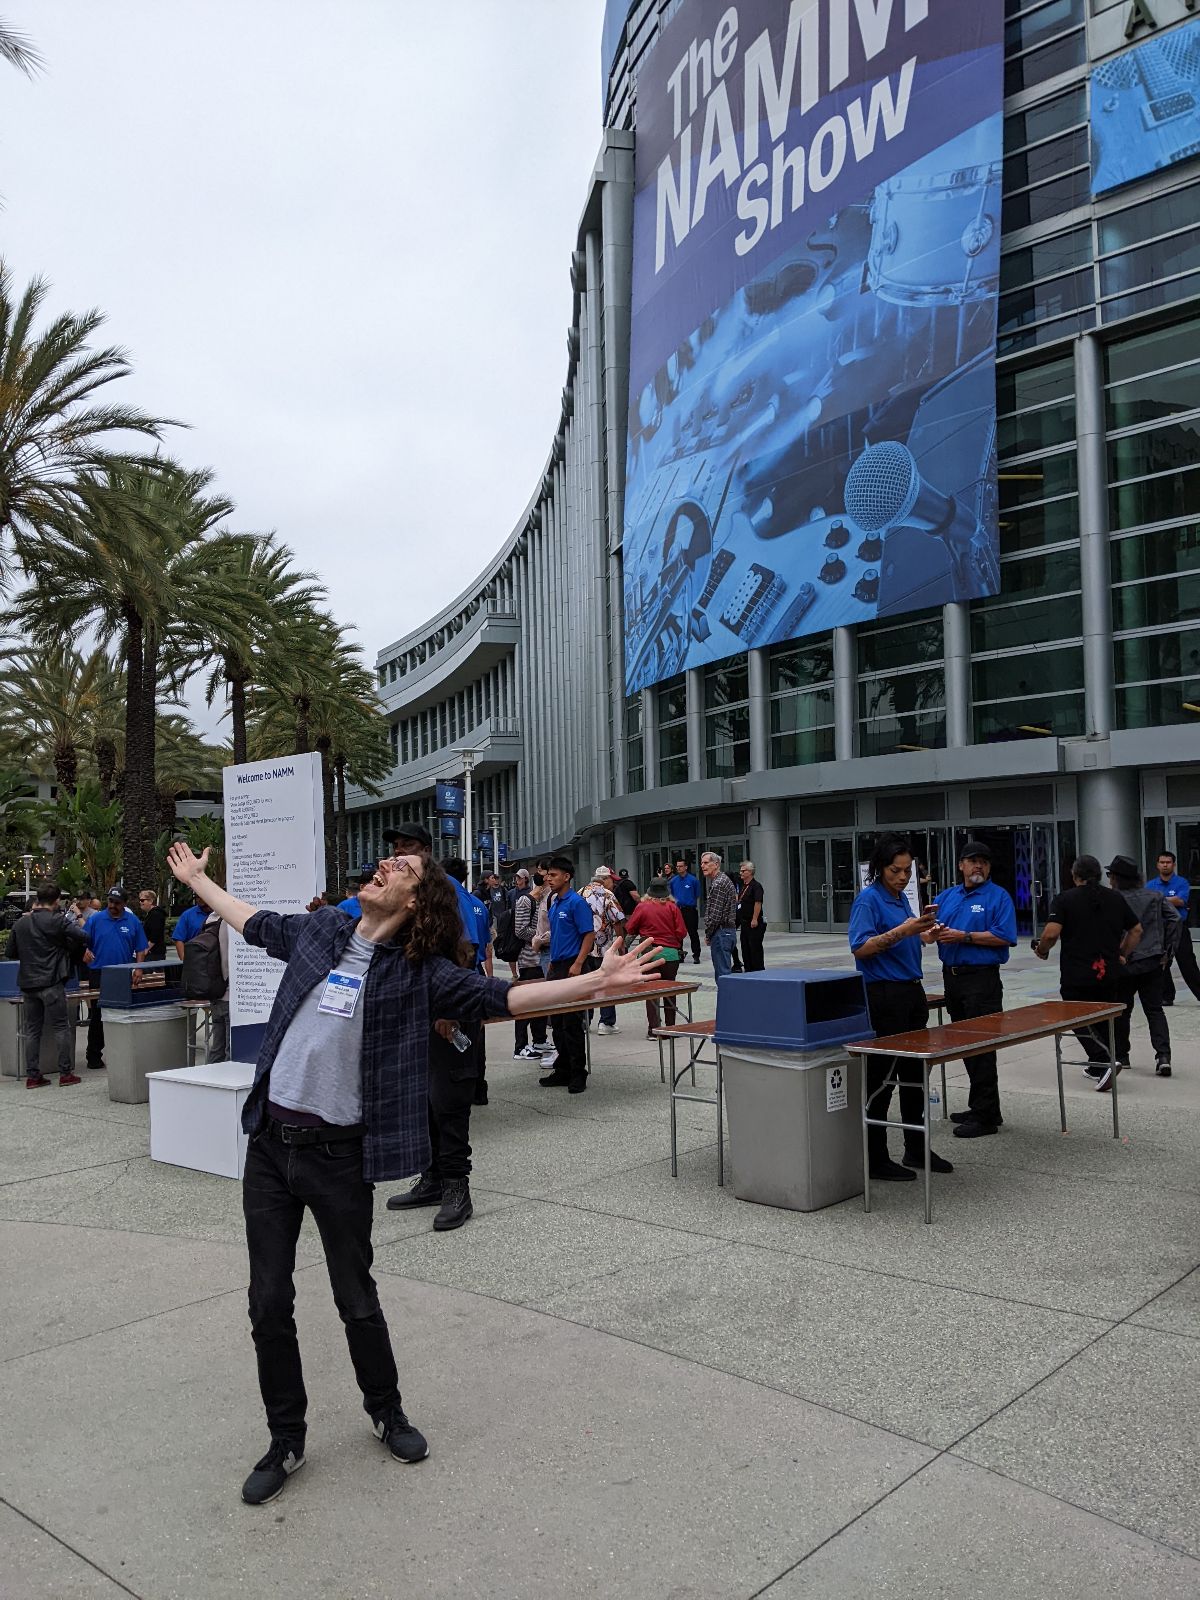 GW Editor in Chief Michael Astley-Brown can hardly hide his excitement as he stands outside NAMM 2022's front entrance